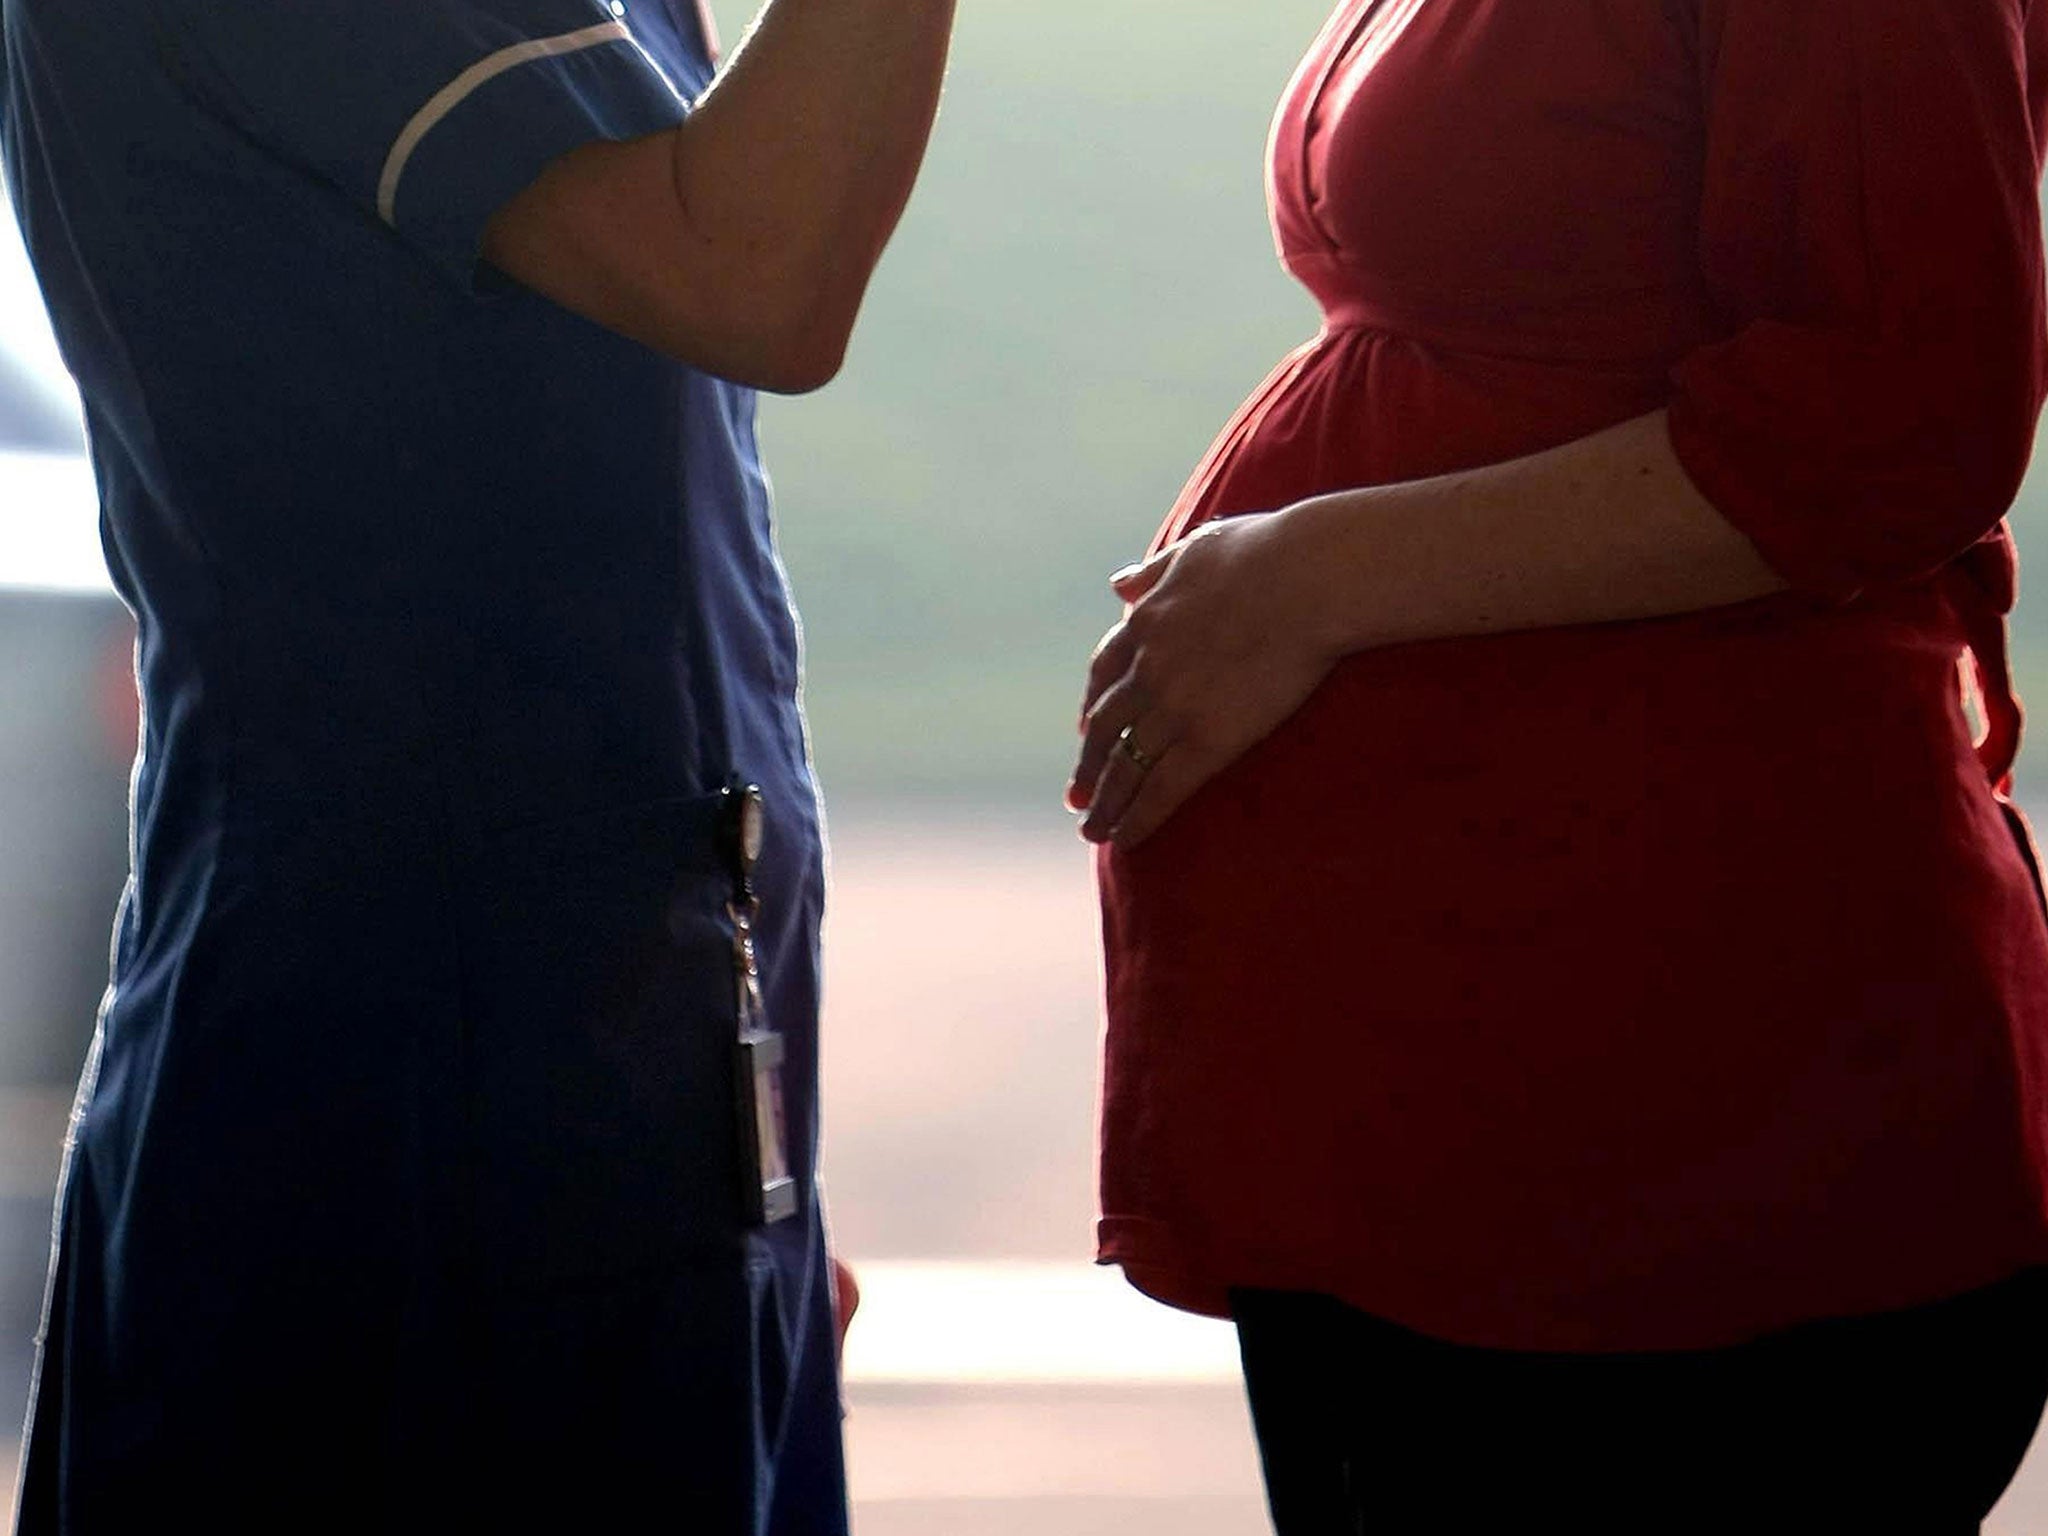 &#13;
Miss Taylor said she was previously told she would need a caesarean for any future births&#13;